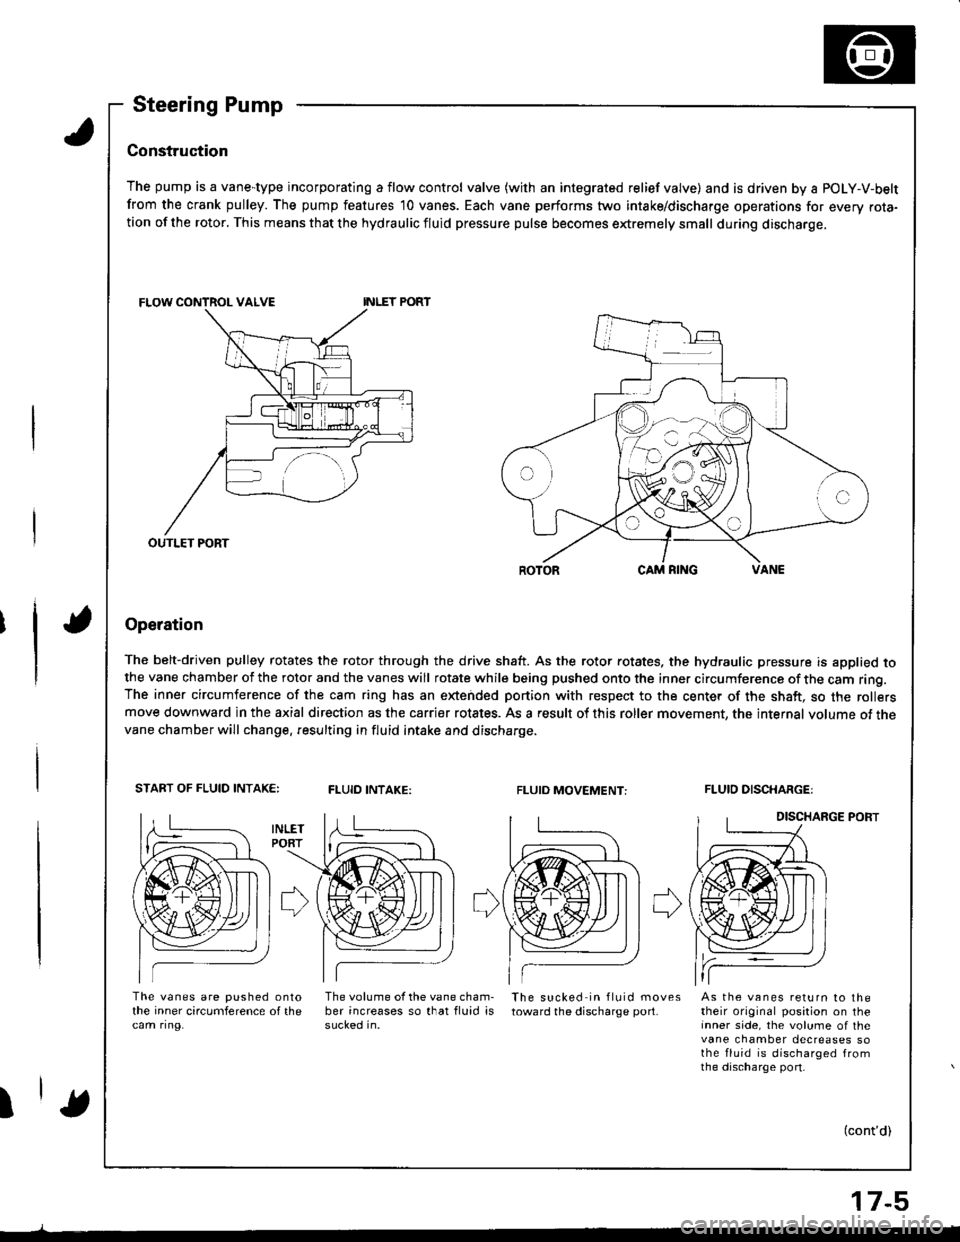 HONDA INTEGRA 1998 4.G User Guide Steering Pump
Construction
The pump is a vane-type incorporating a flow control valve (with an integrated relief valve) and is driven by a POLY-V-belt
from the crank pulley. The pump features 10 vane